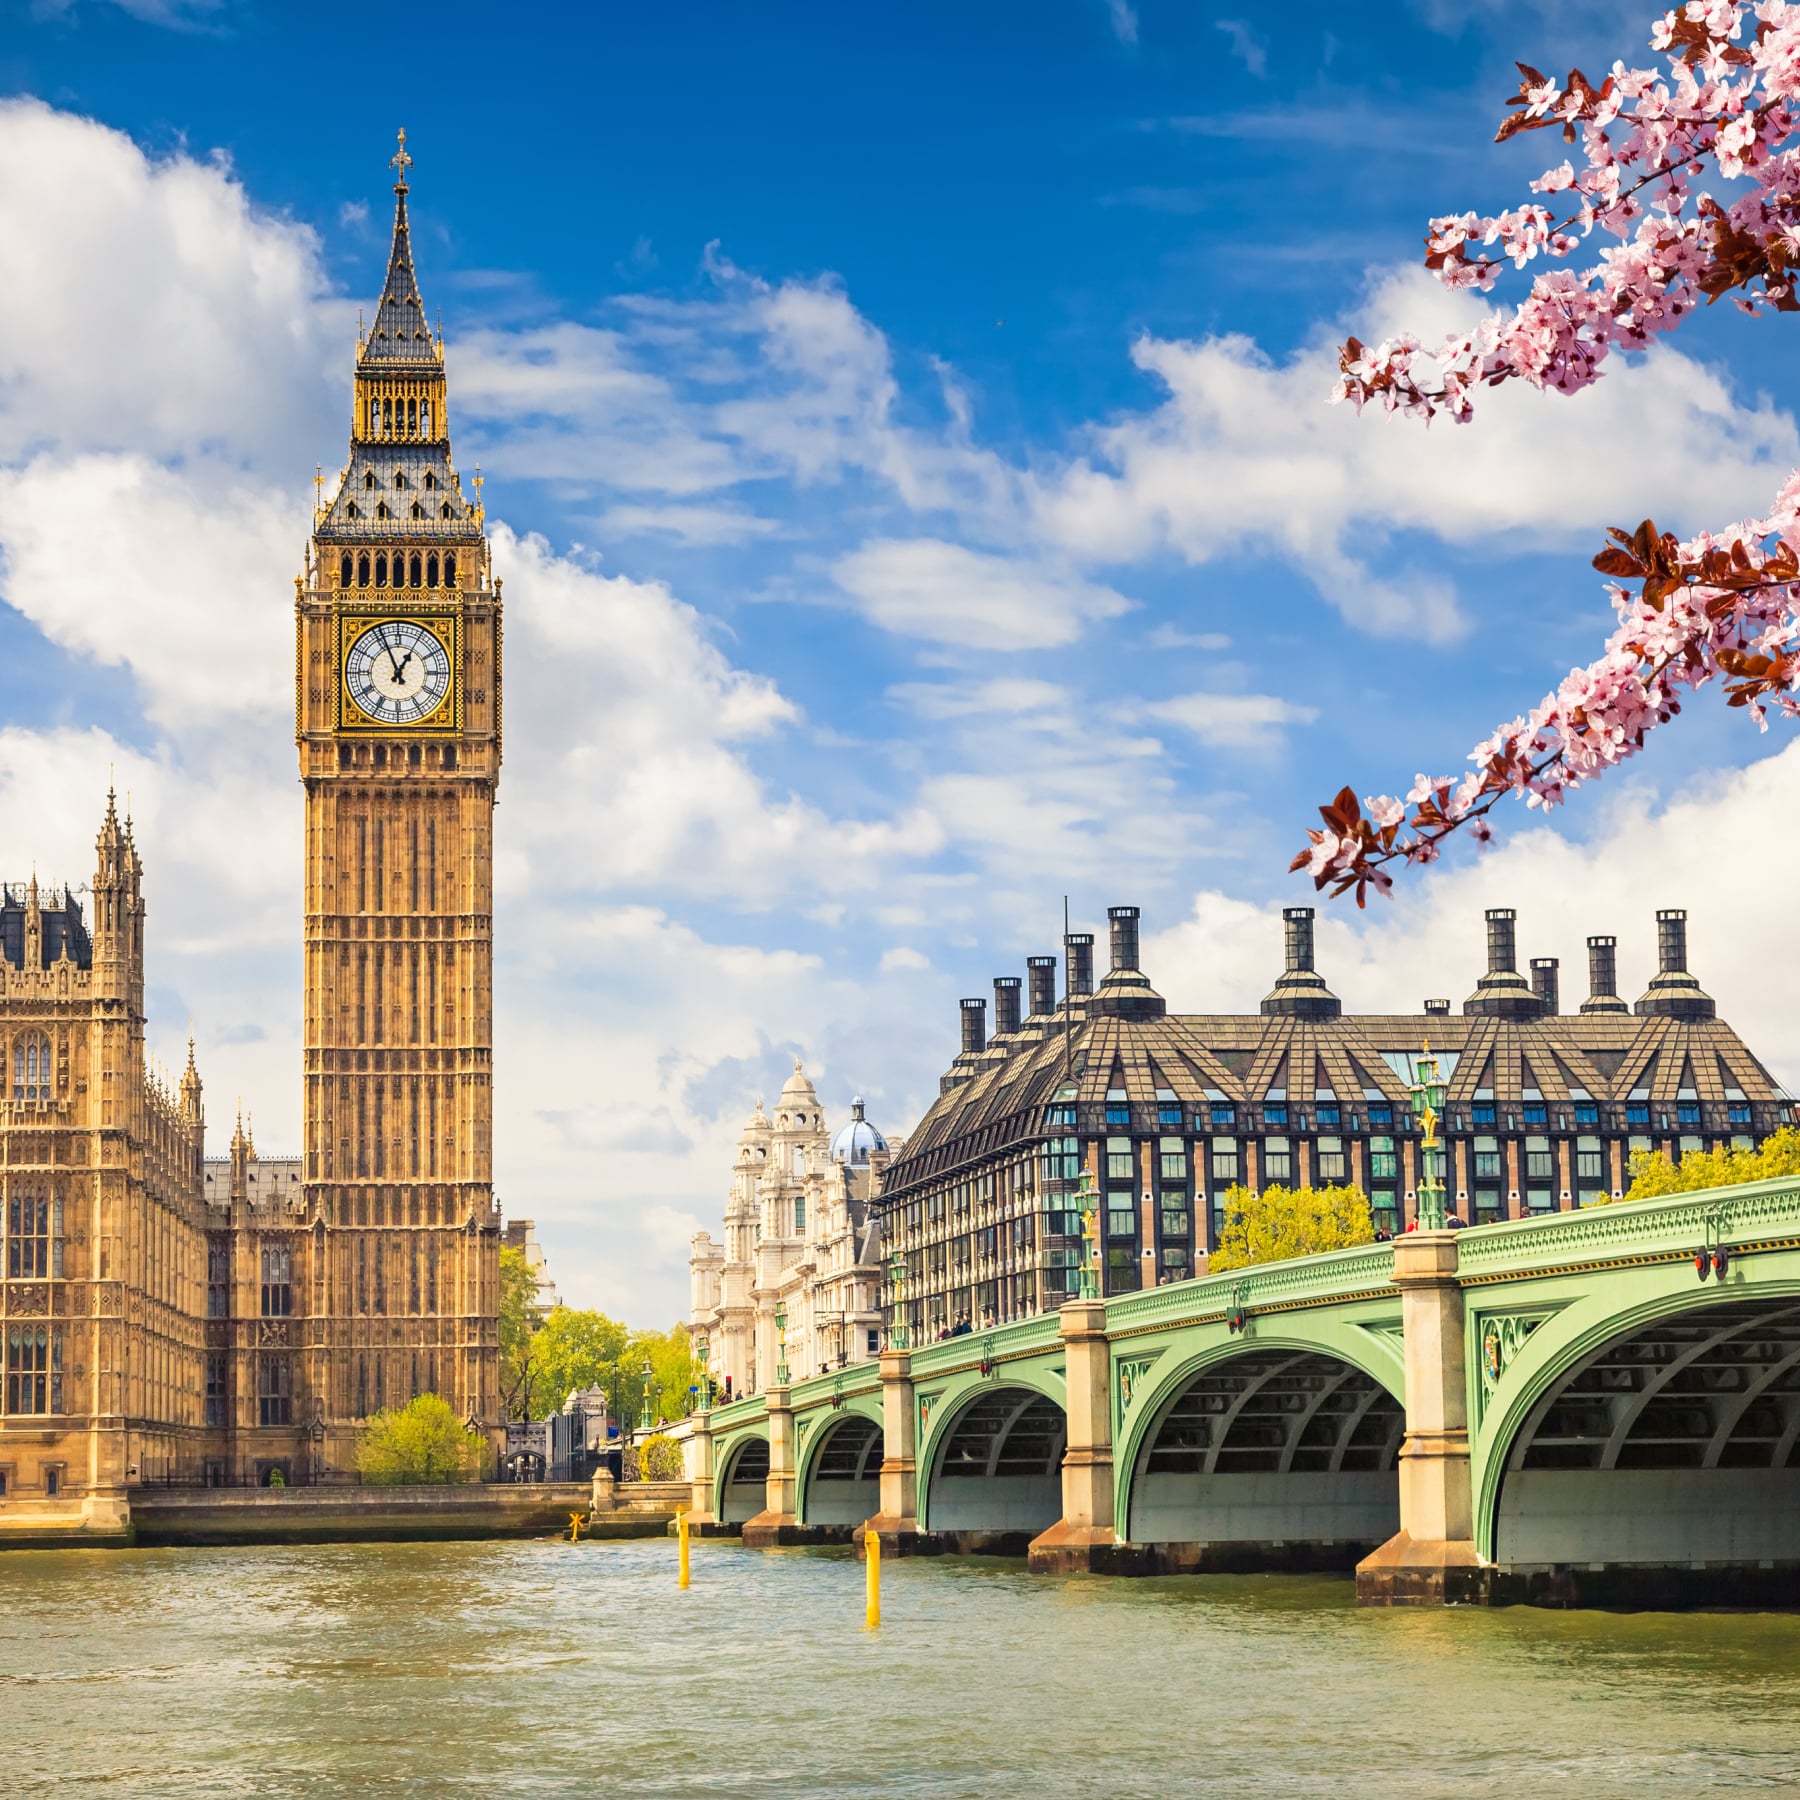 London is one of the best travel destinations in literature